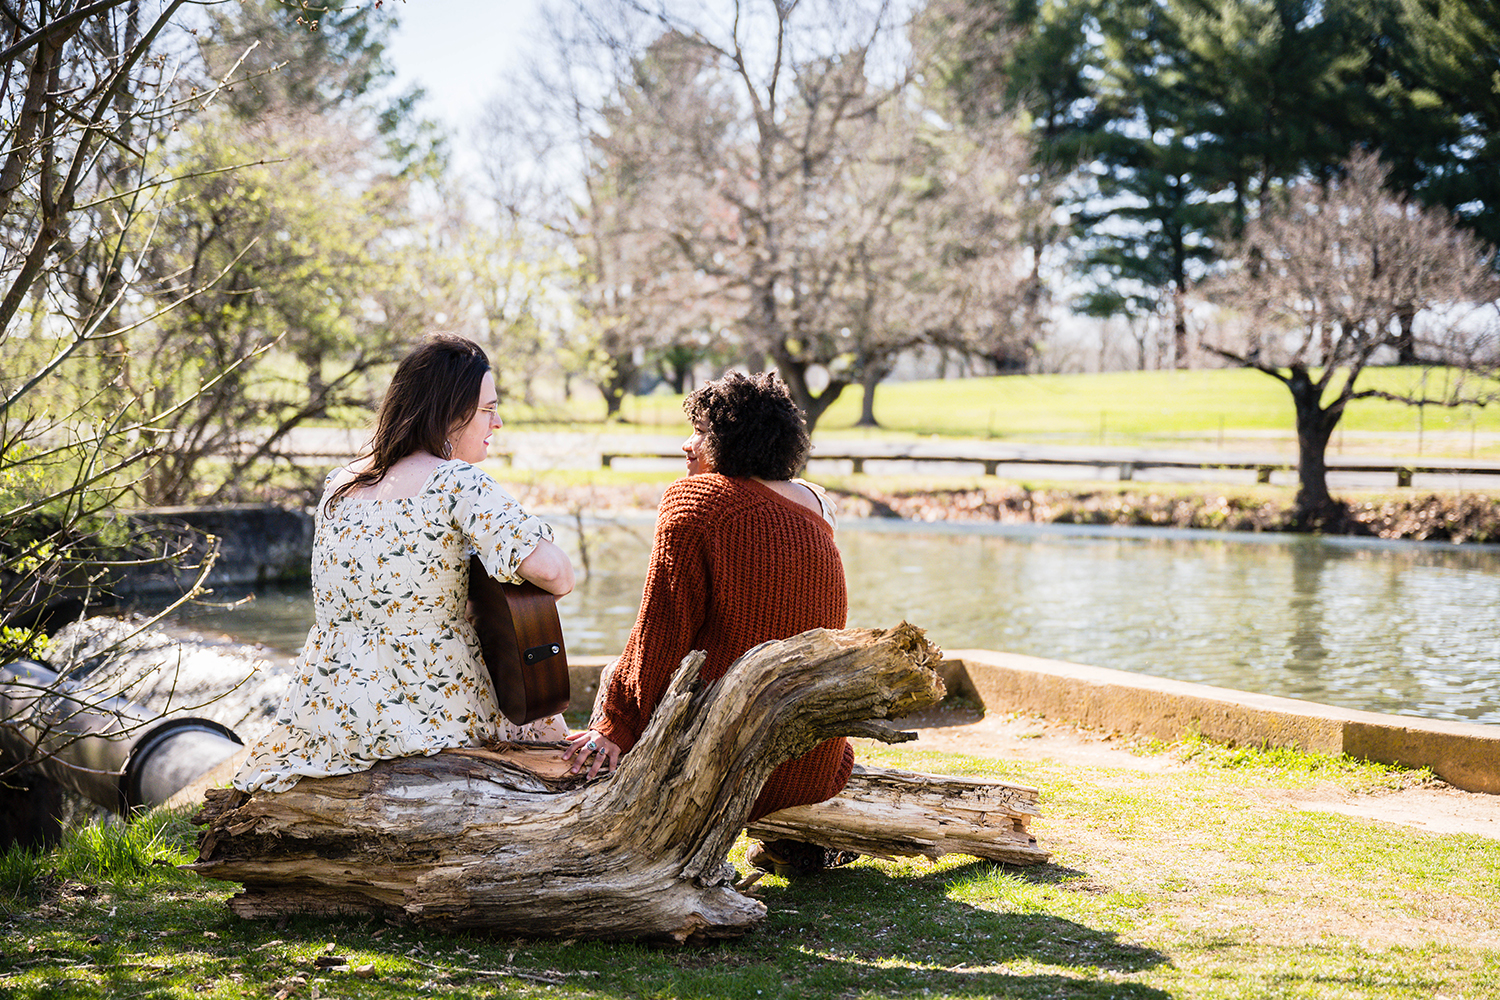 A queer couple sits on a large part of a tree at Duck Pond. One partner sings and plays the guitar while the other listens intently.